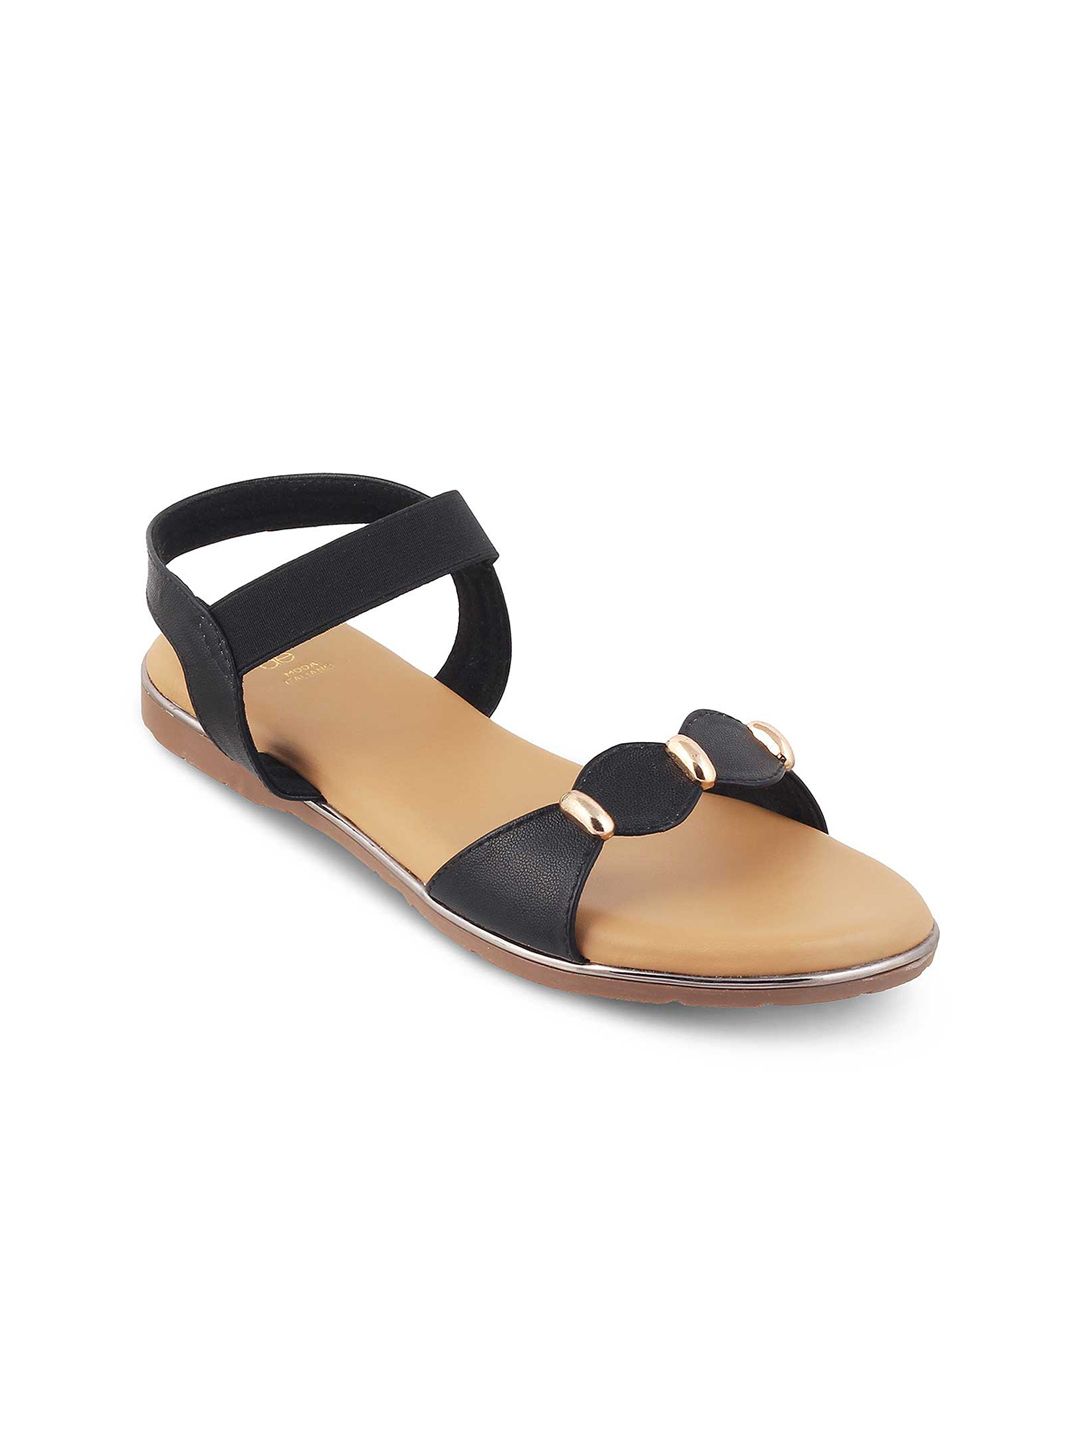 Tresmode Women Black Colourblocked Open Toe Flats with Bows Price in India